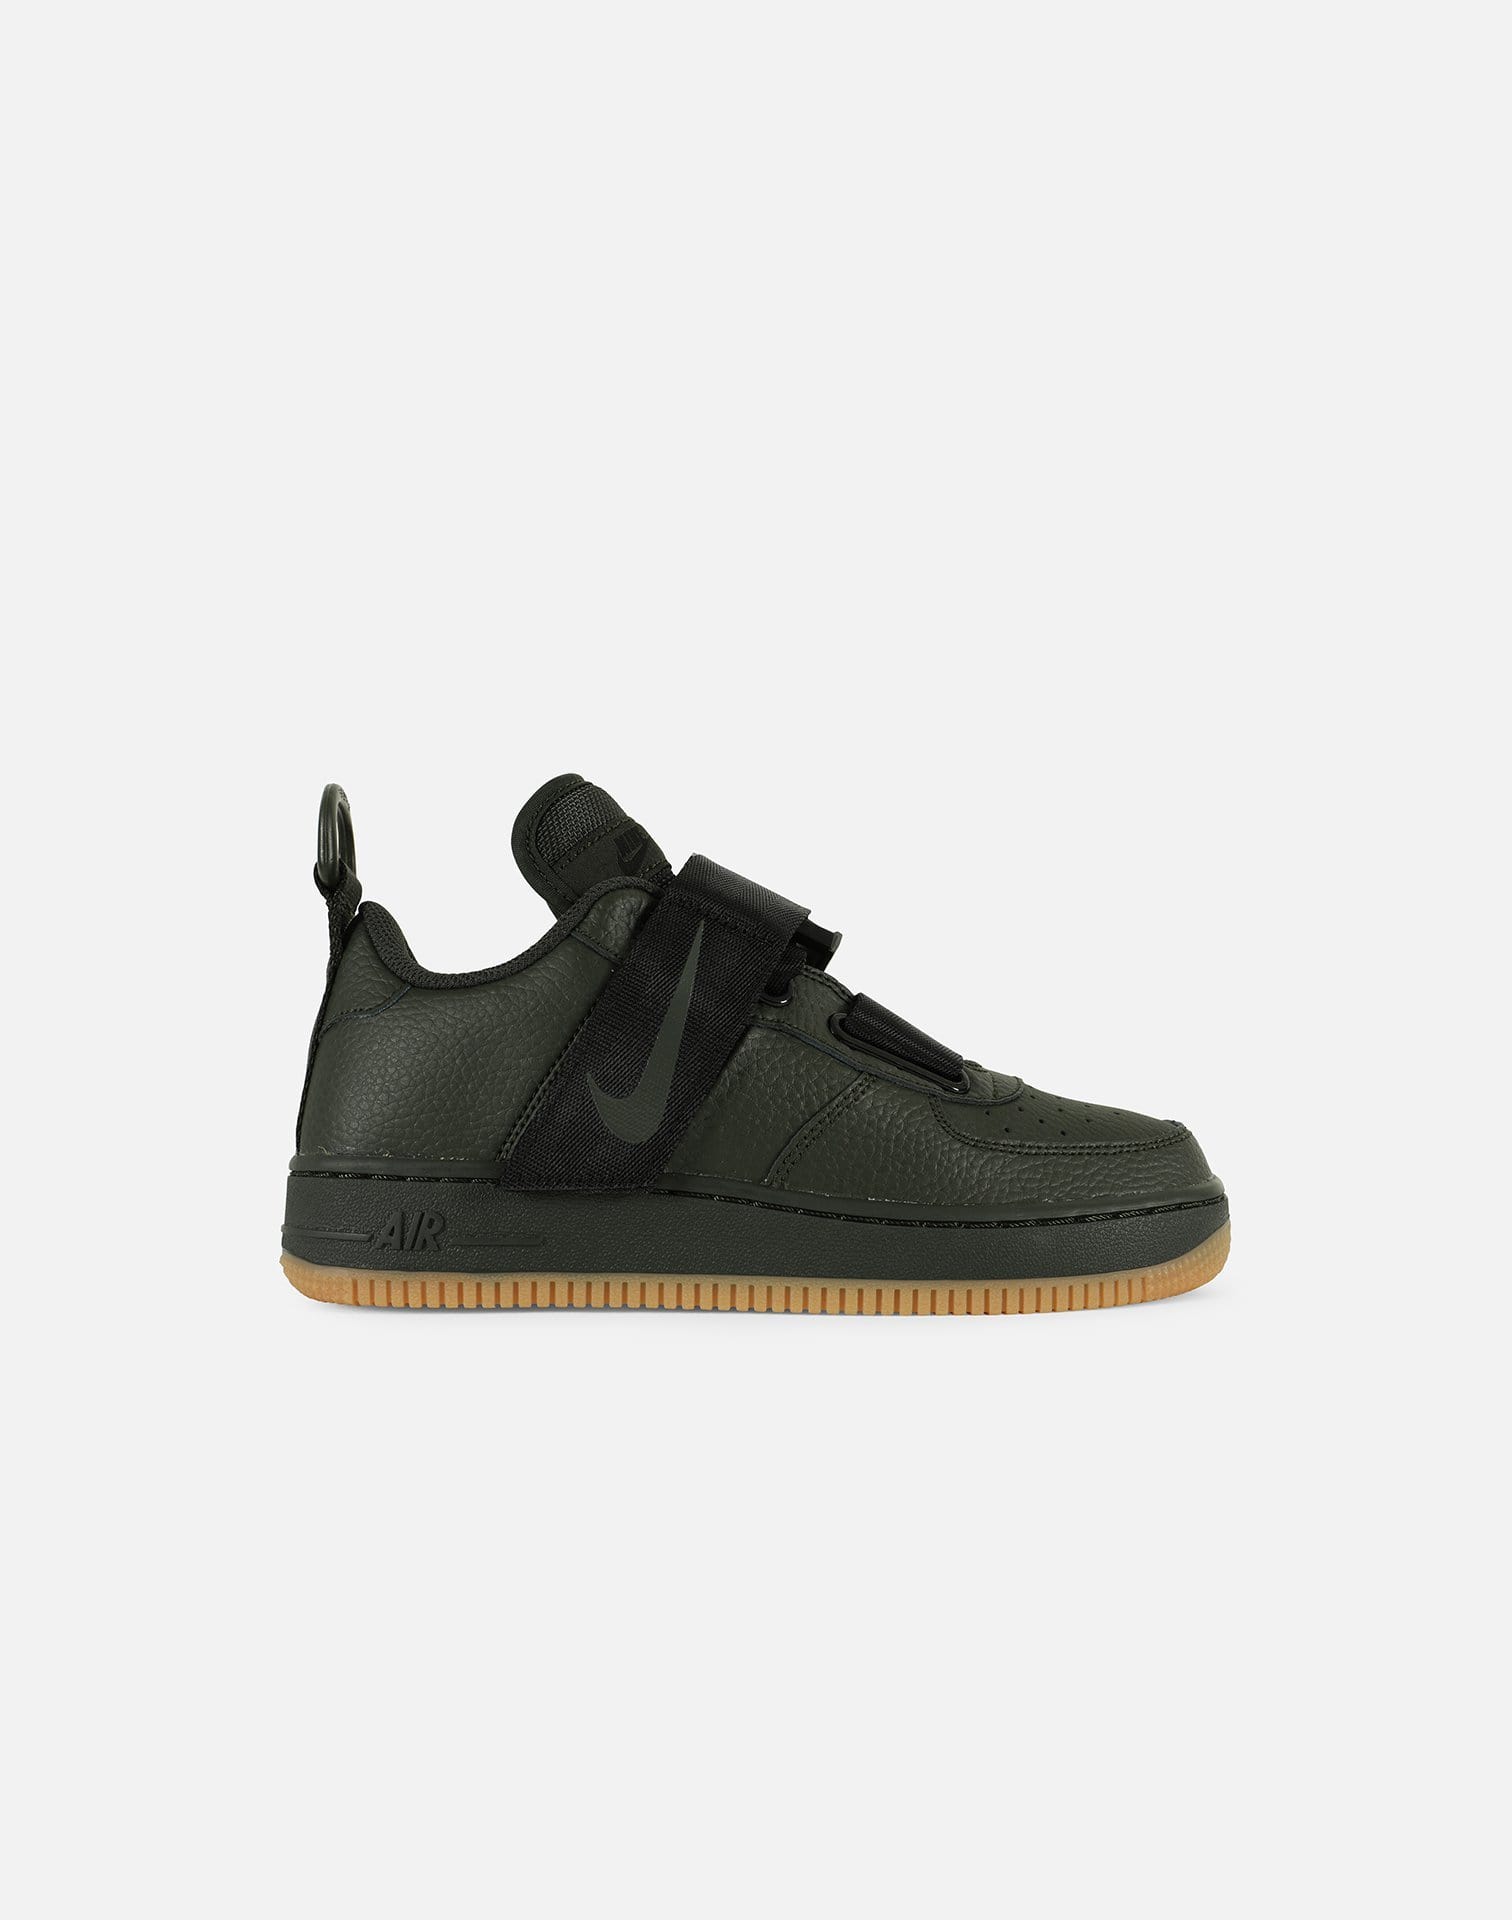 olive green air force 1 grade school